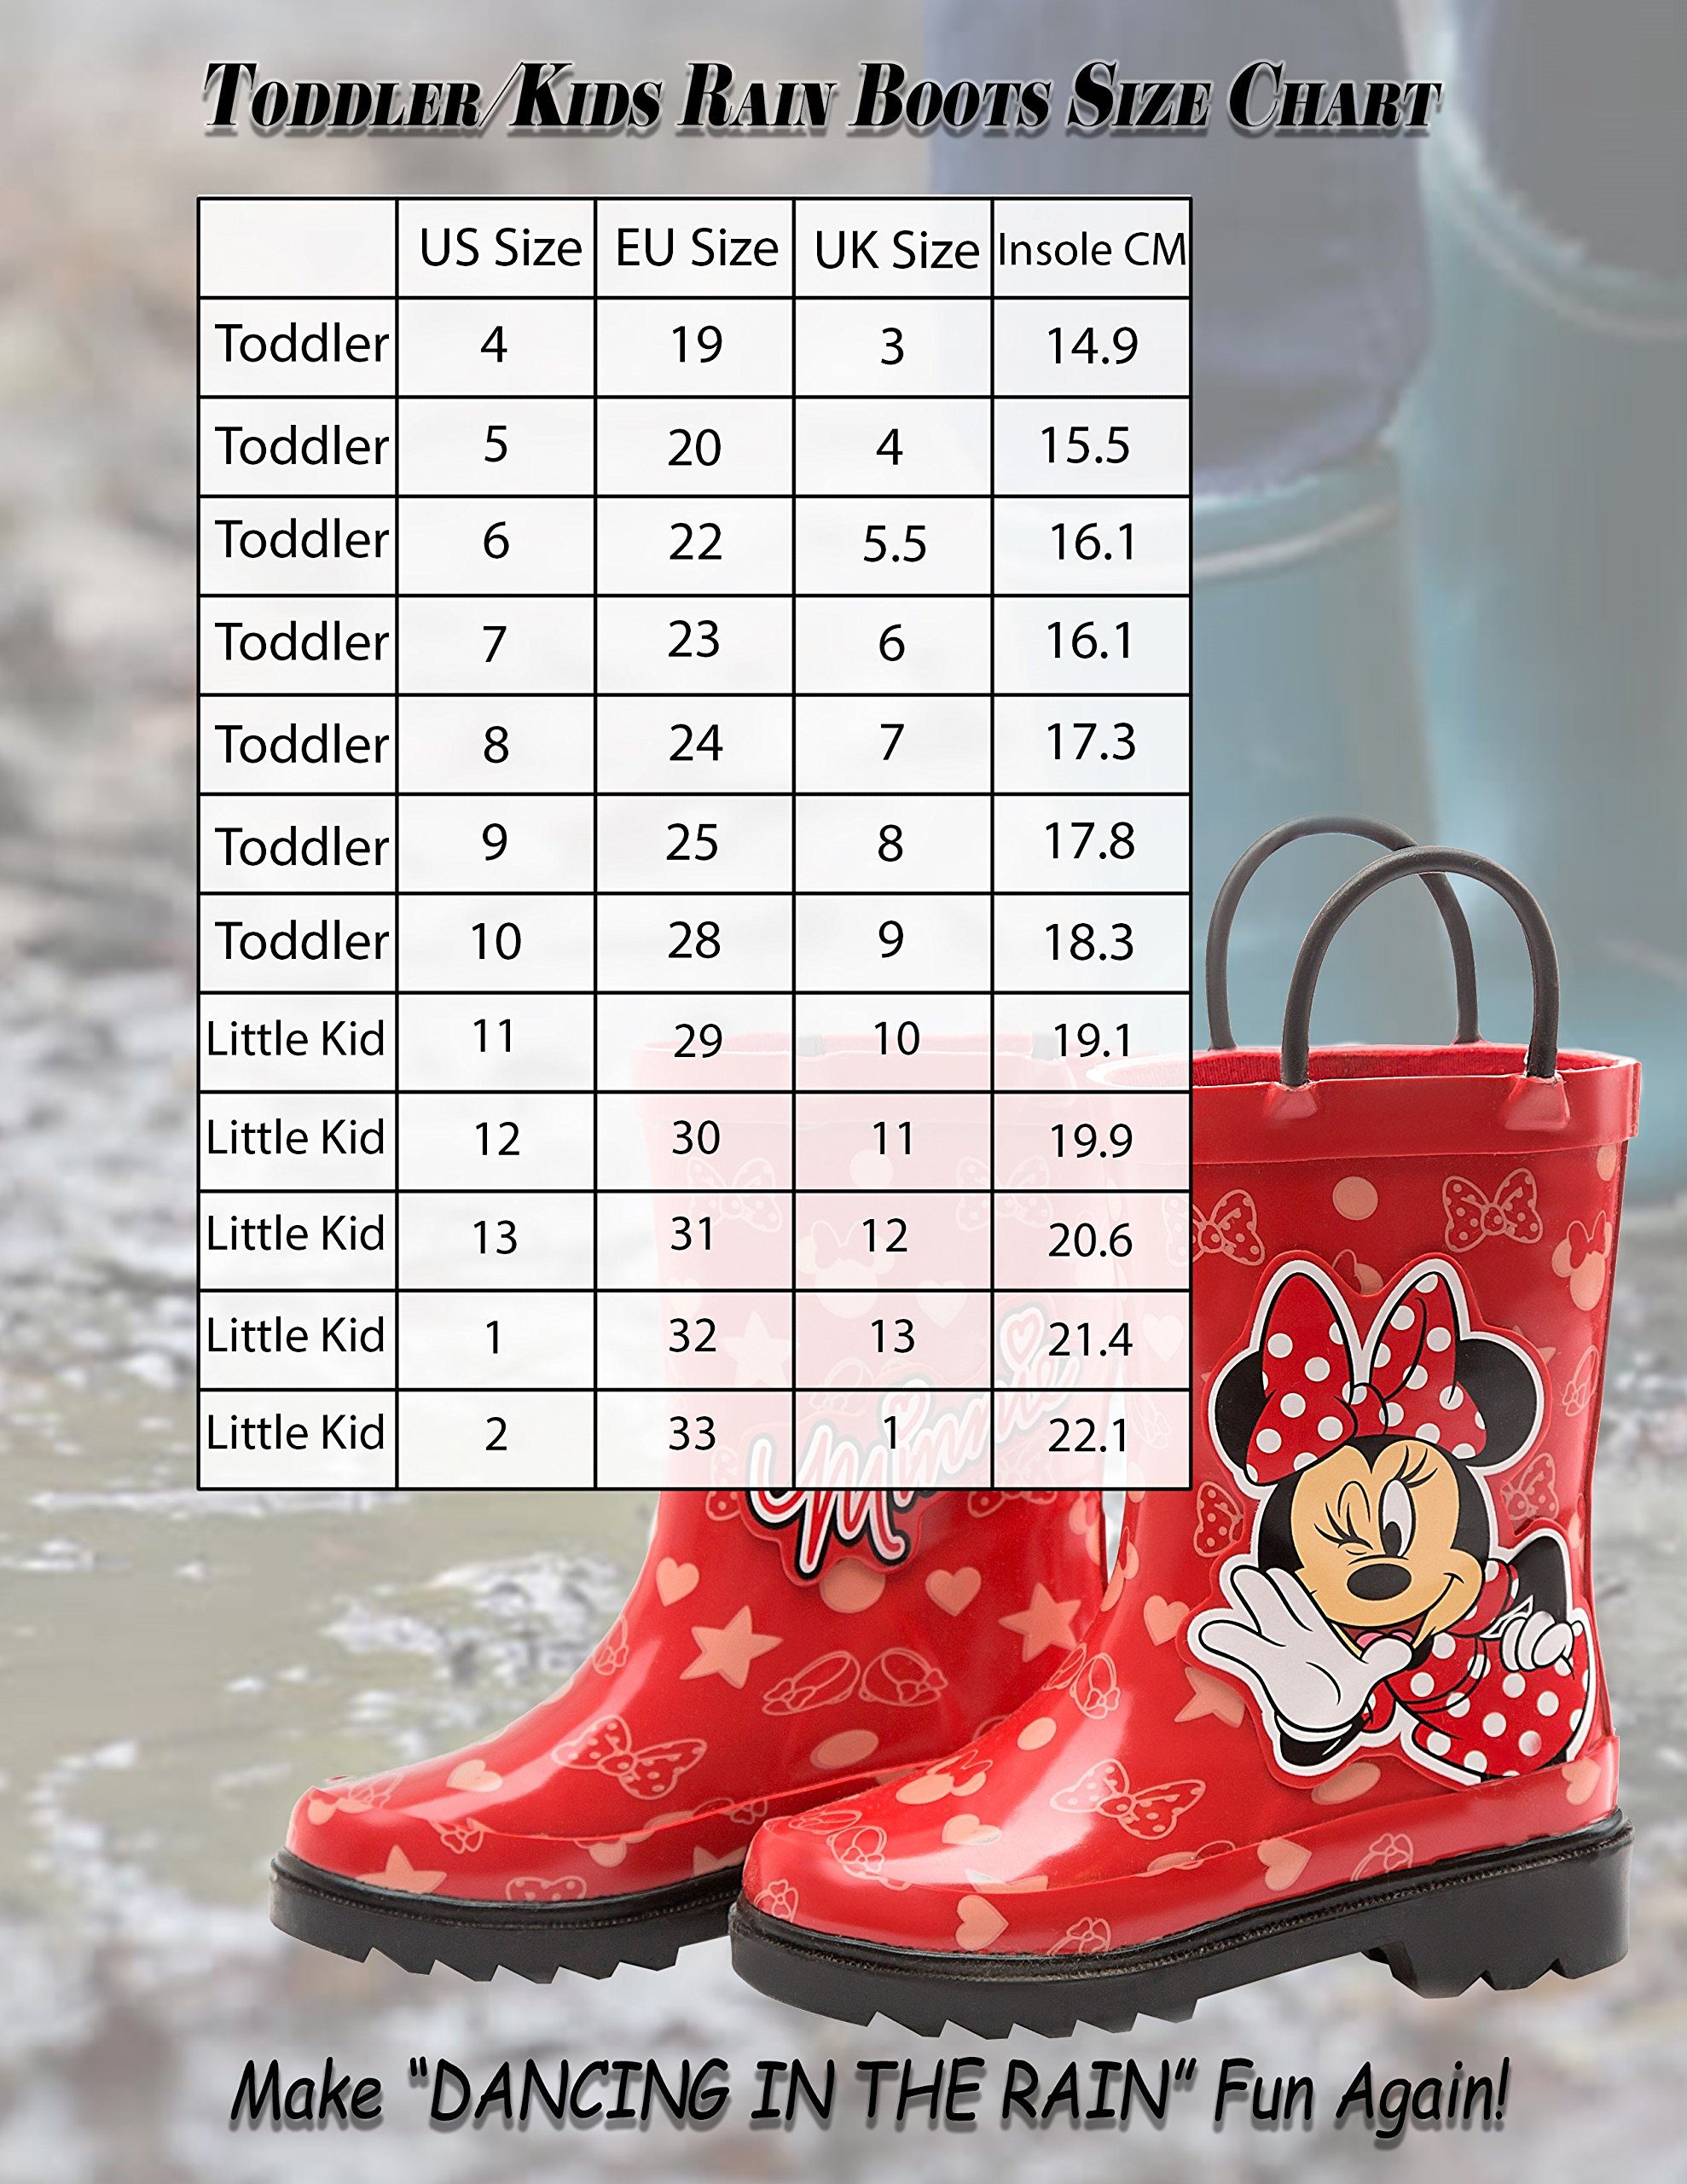 Disney Minnie Mouse and Mickey Mouse Rubber Rainboots - Waterproof - Easy-on - Toddler and Little Kids Sizes - Boys, Girls